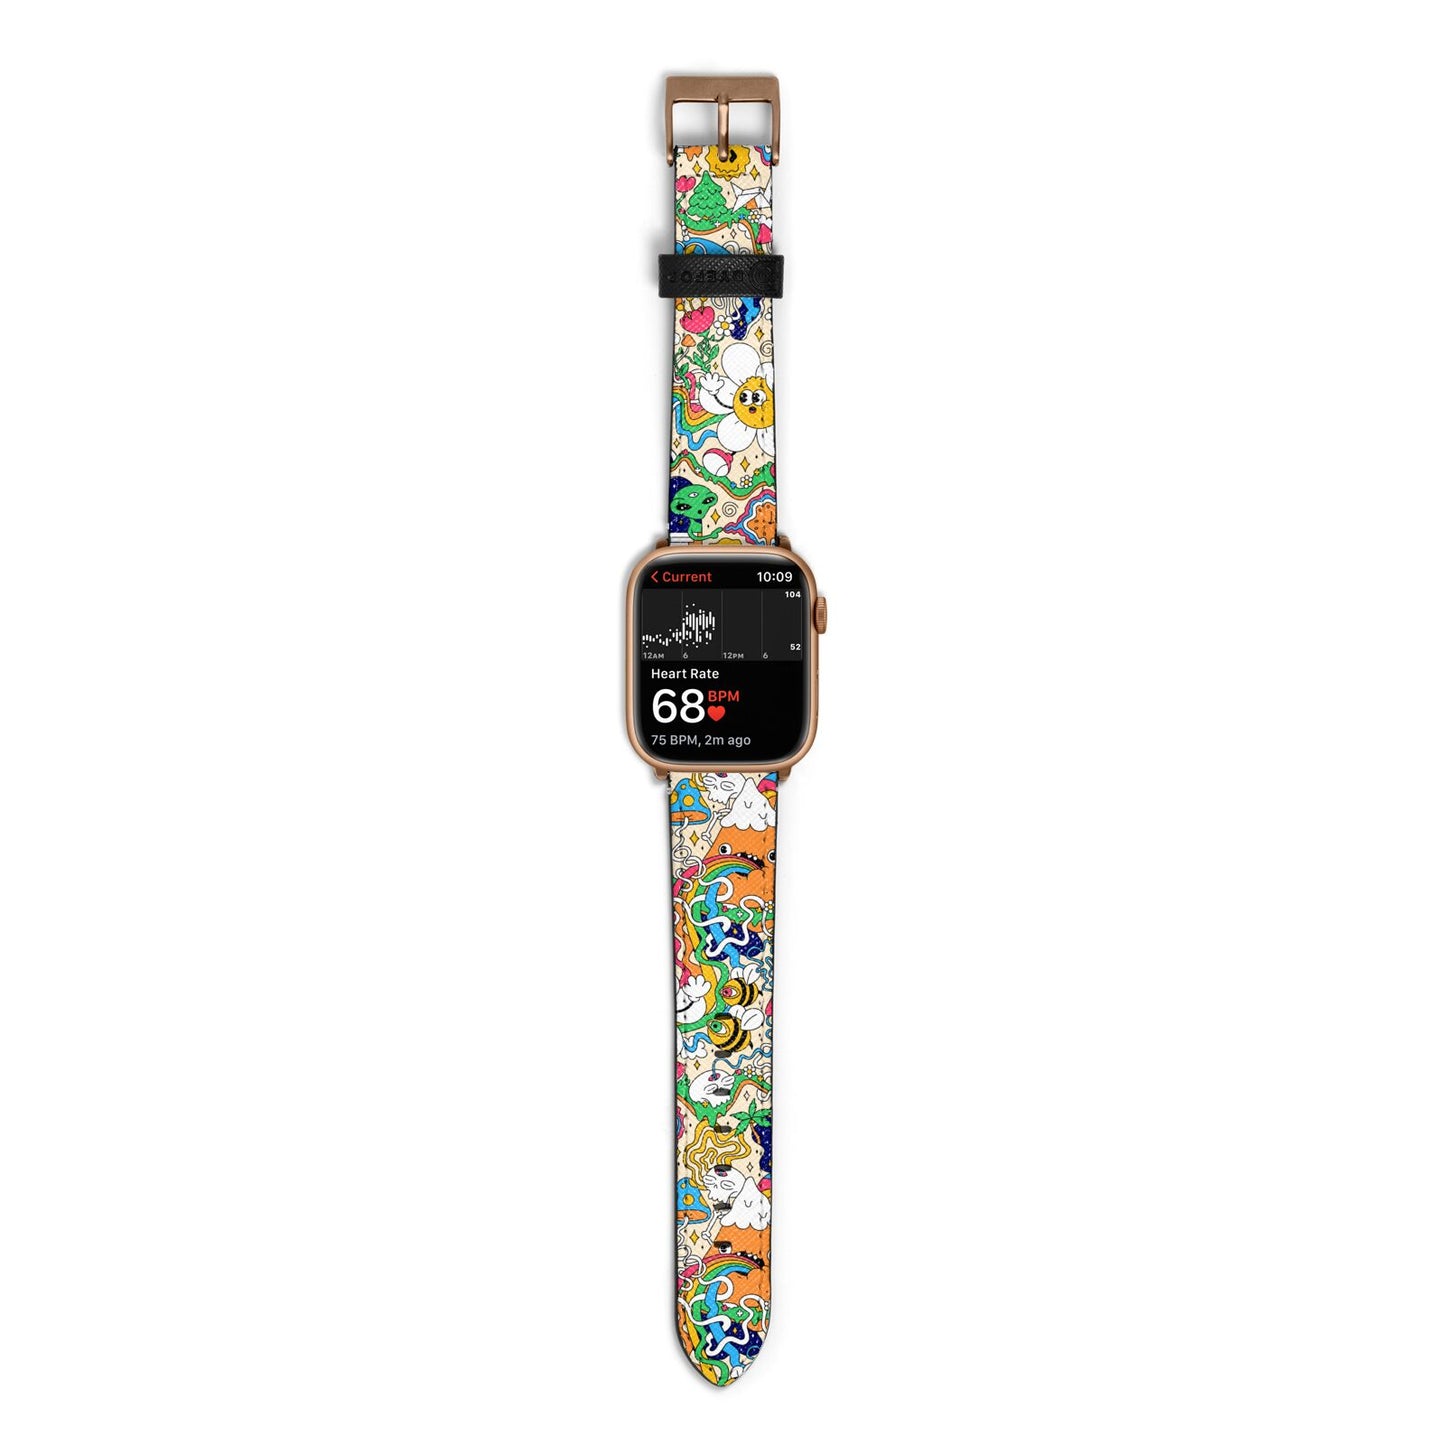 Psychedelic Trippy Apple Watch Strap Size 38mm with Gold Hardware